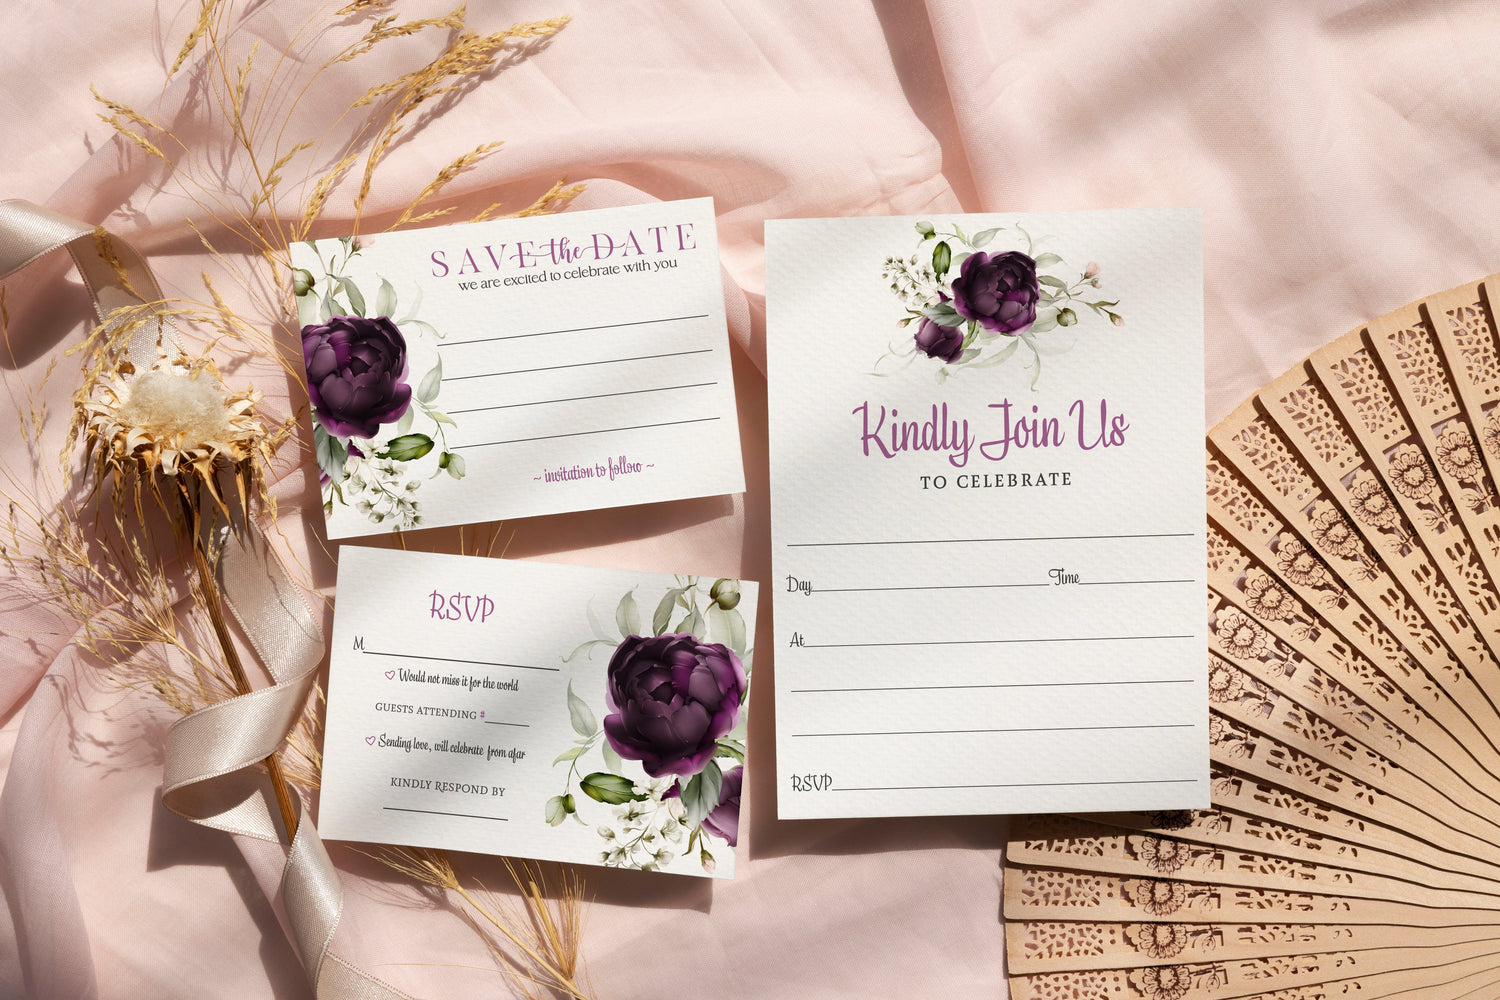  Perfect for the contemporary bride, our purple passion theme will infuse your celebration with style and a modern flair.